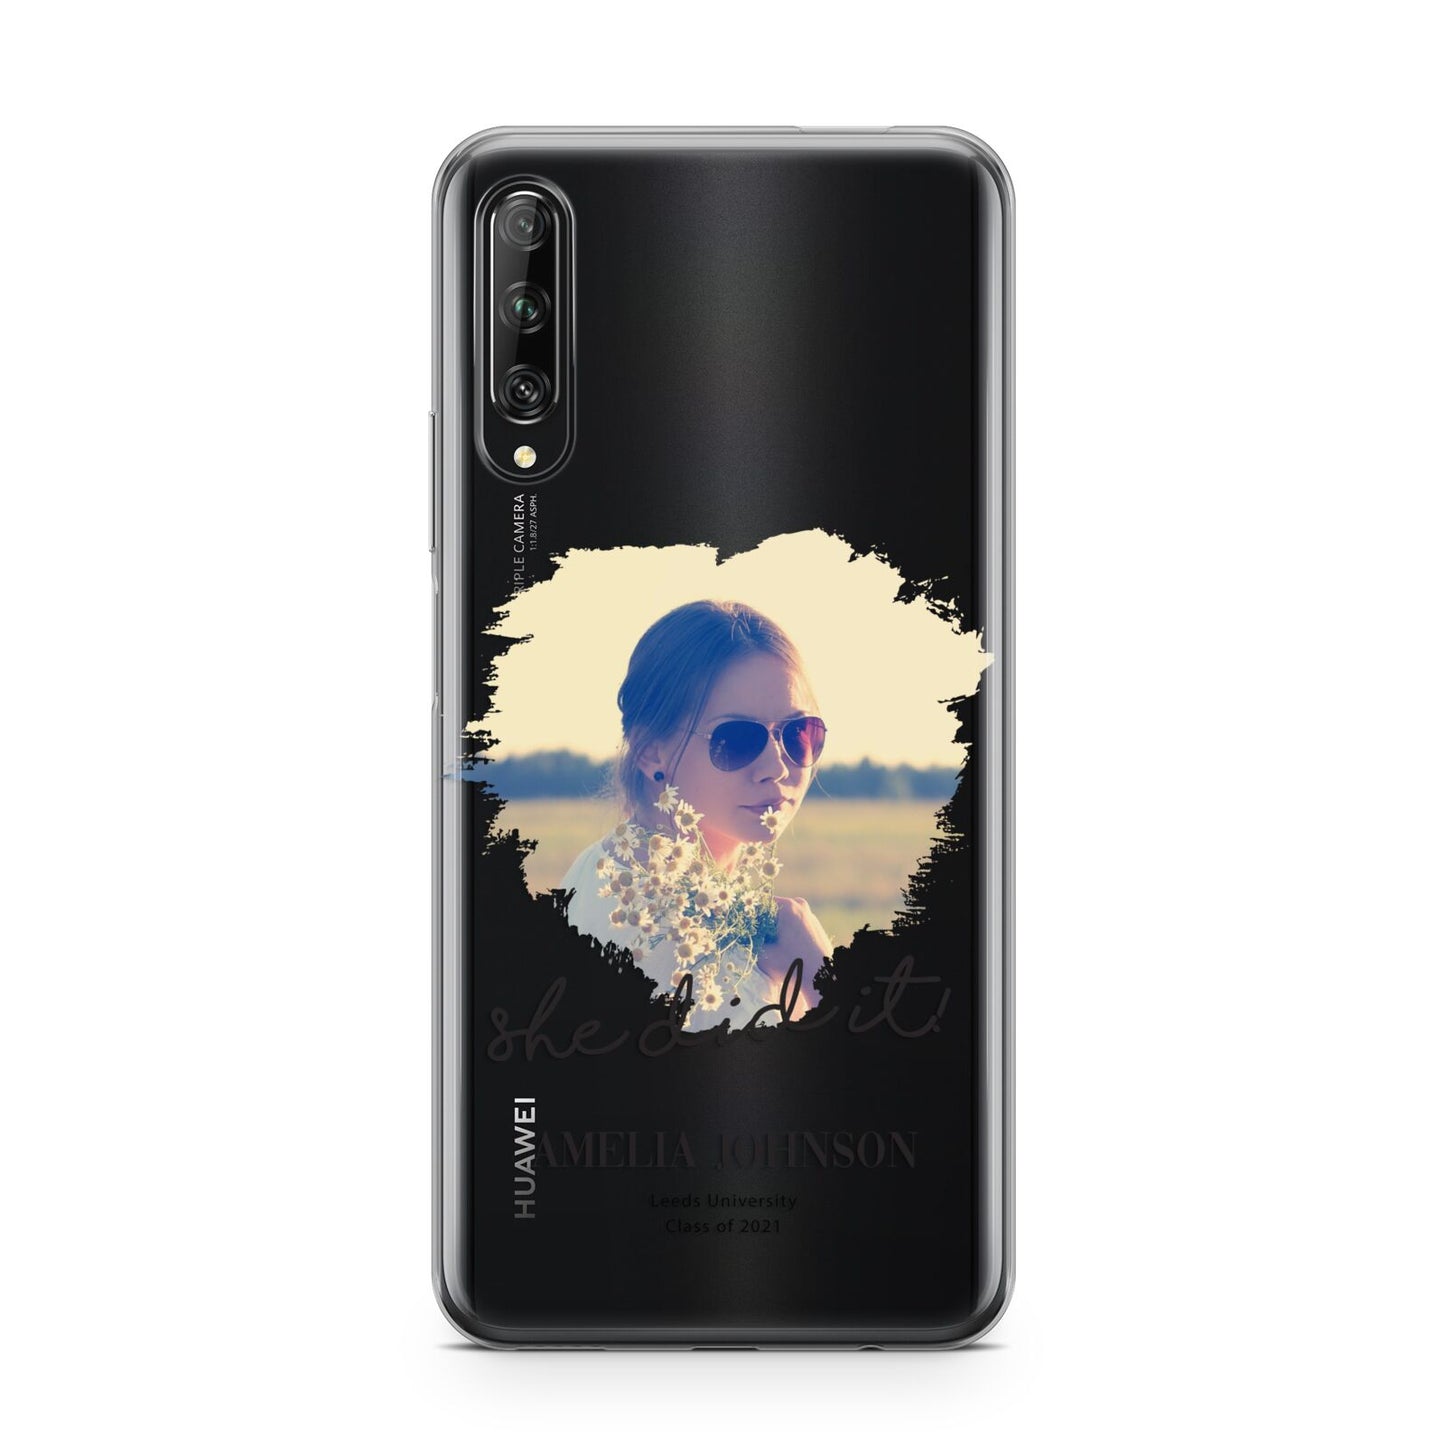 She Did It Graduation Photo with Name Huawei P Smart Pro 2019